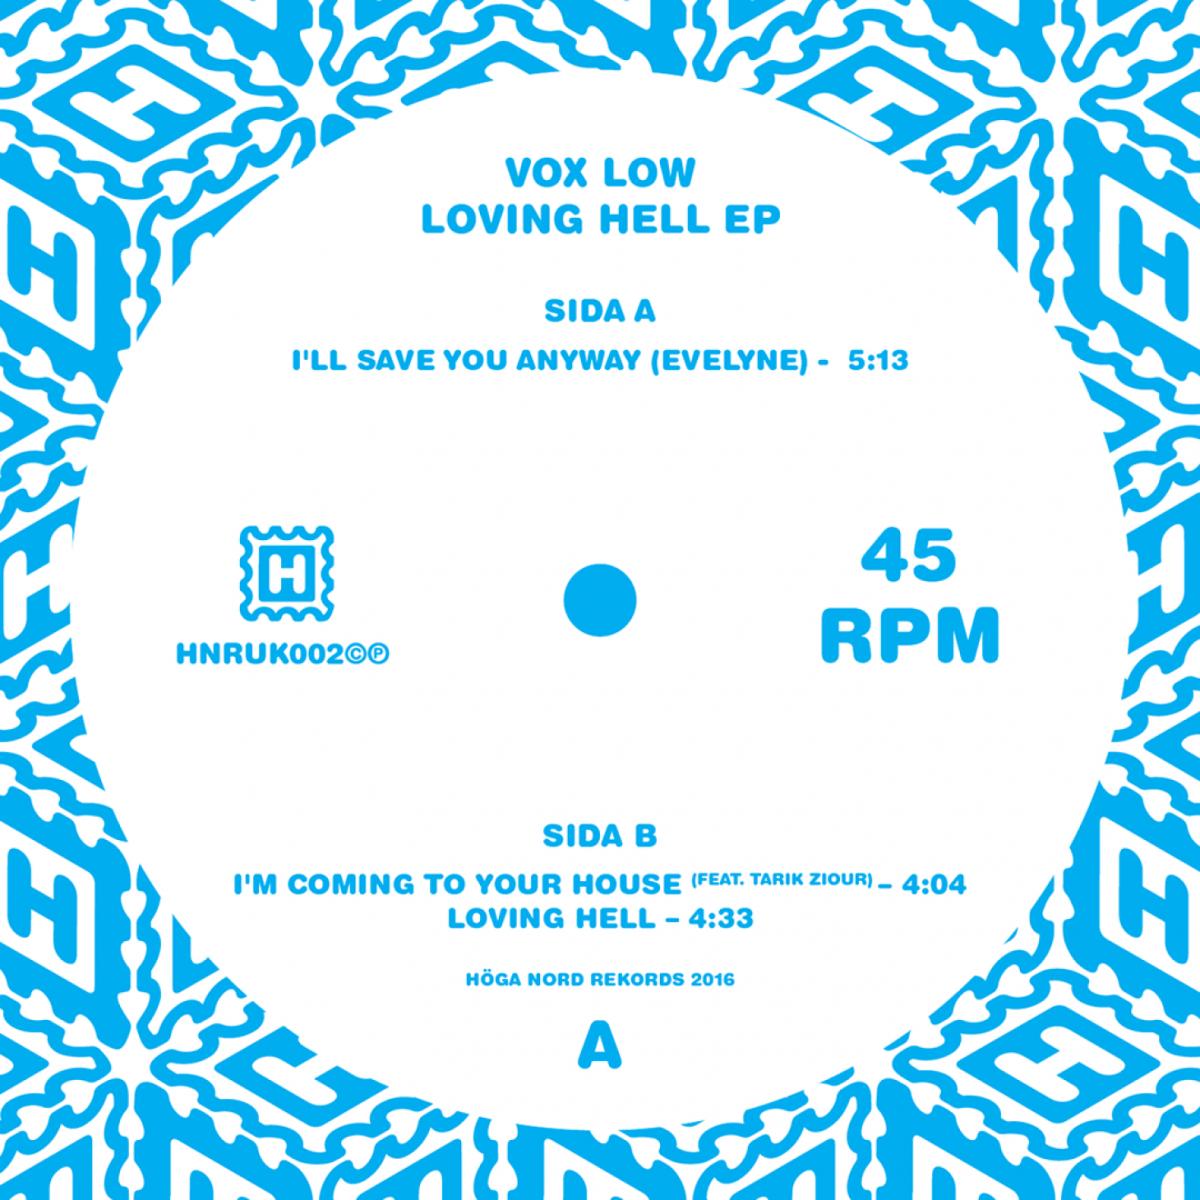 Vox Low/LOVING HELL EP 12"